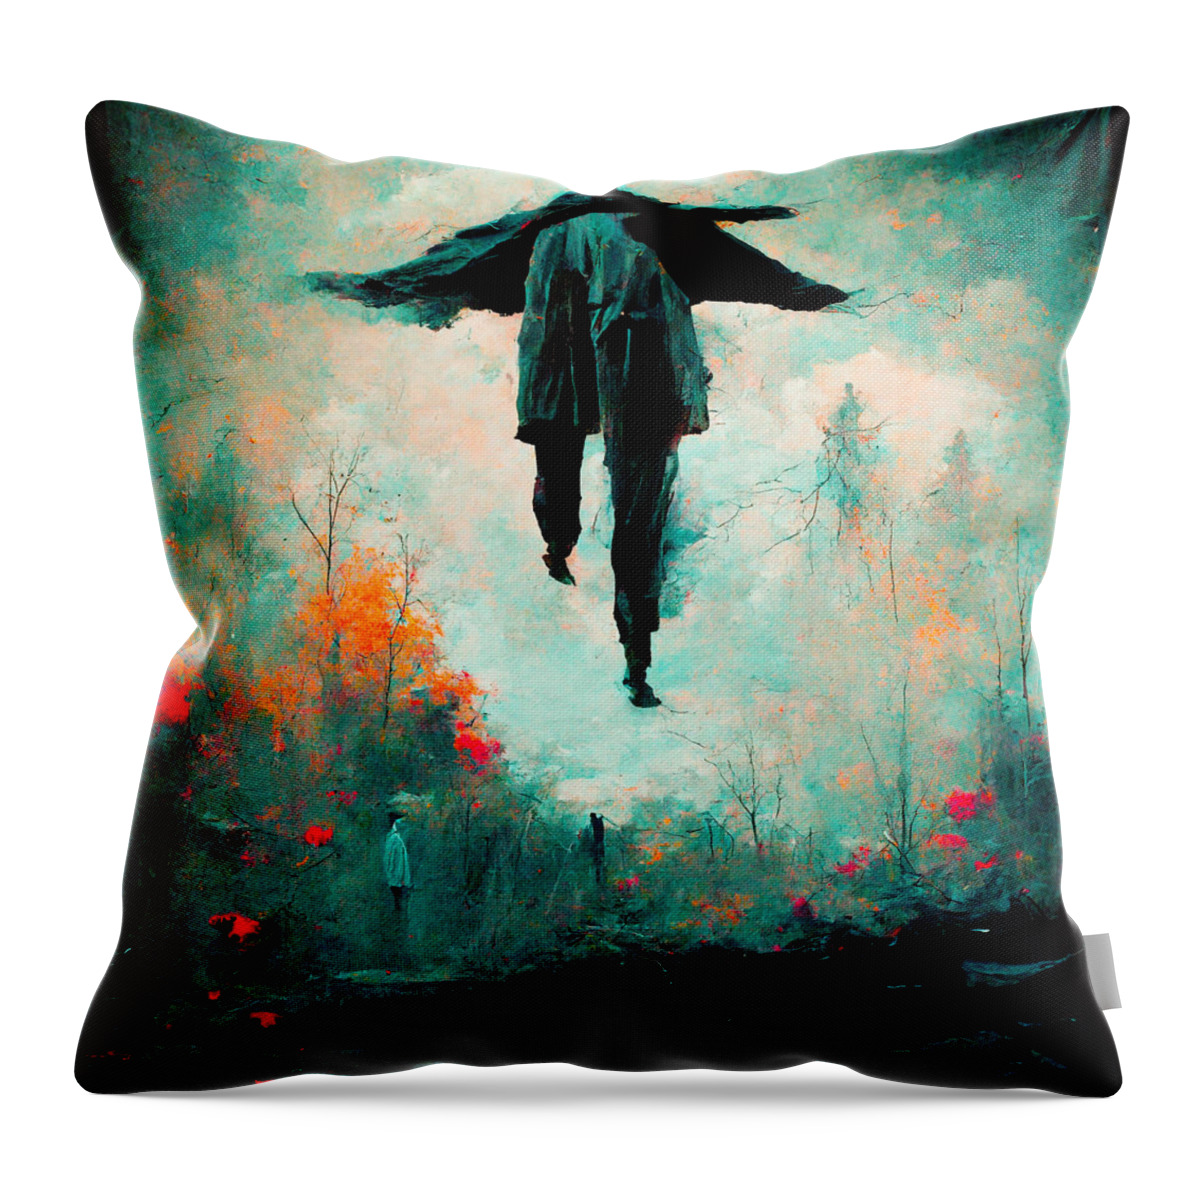 Trenchcoats Throw Pillow featuring the digital art Trenchcoats #4 by Craig Boehman